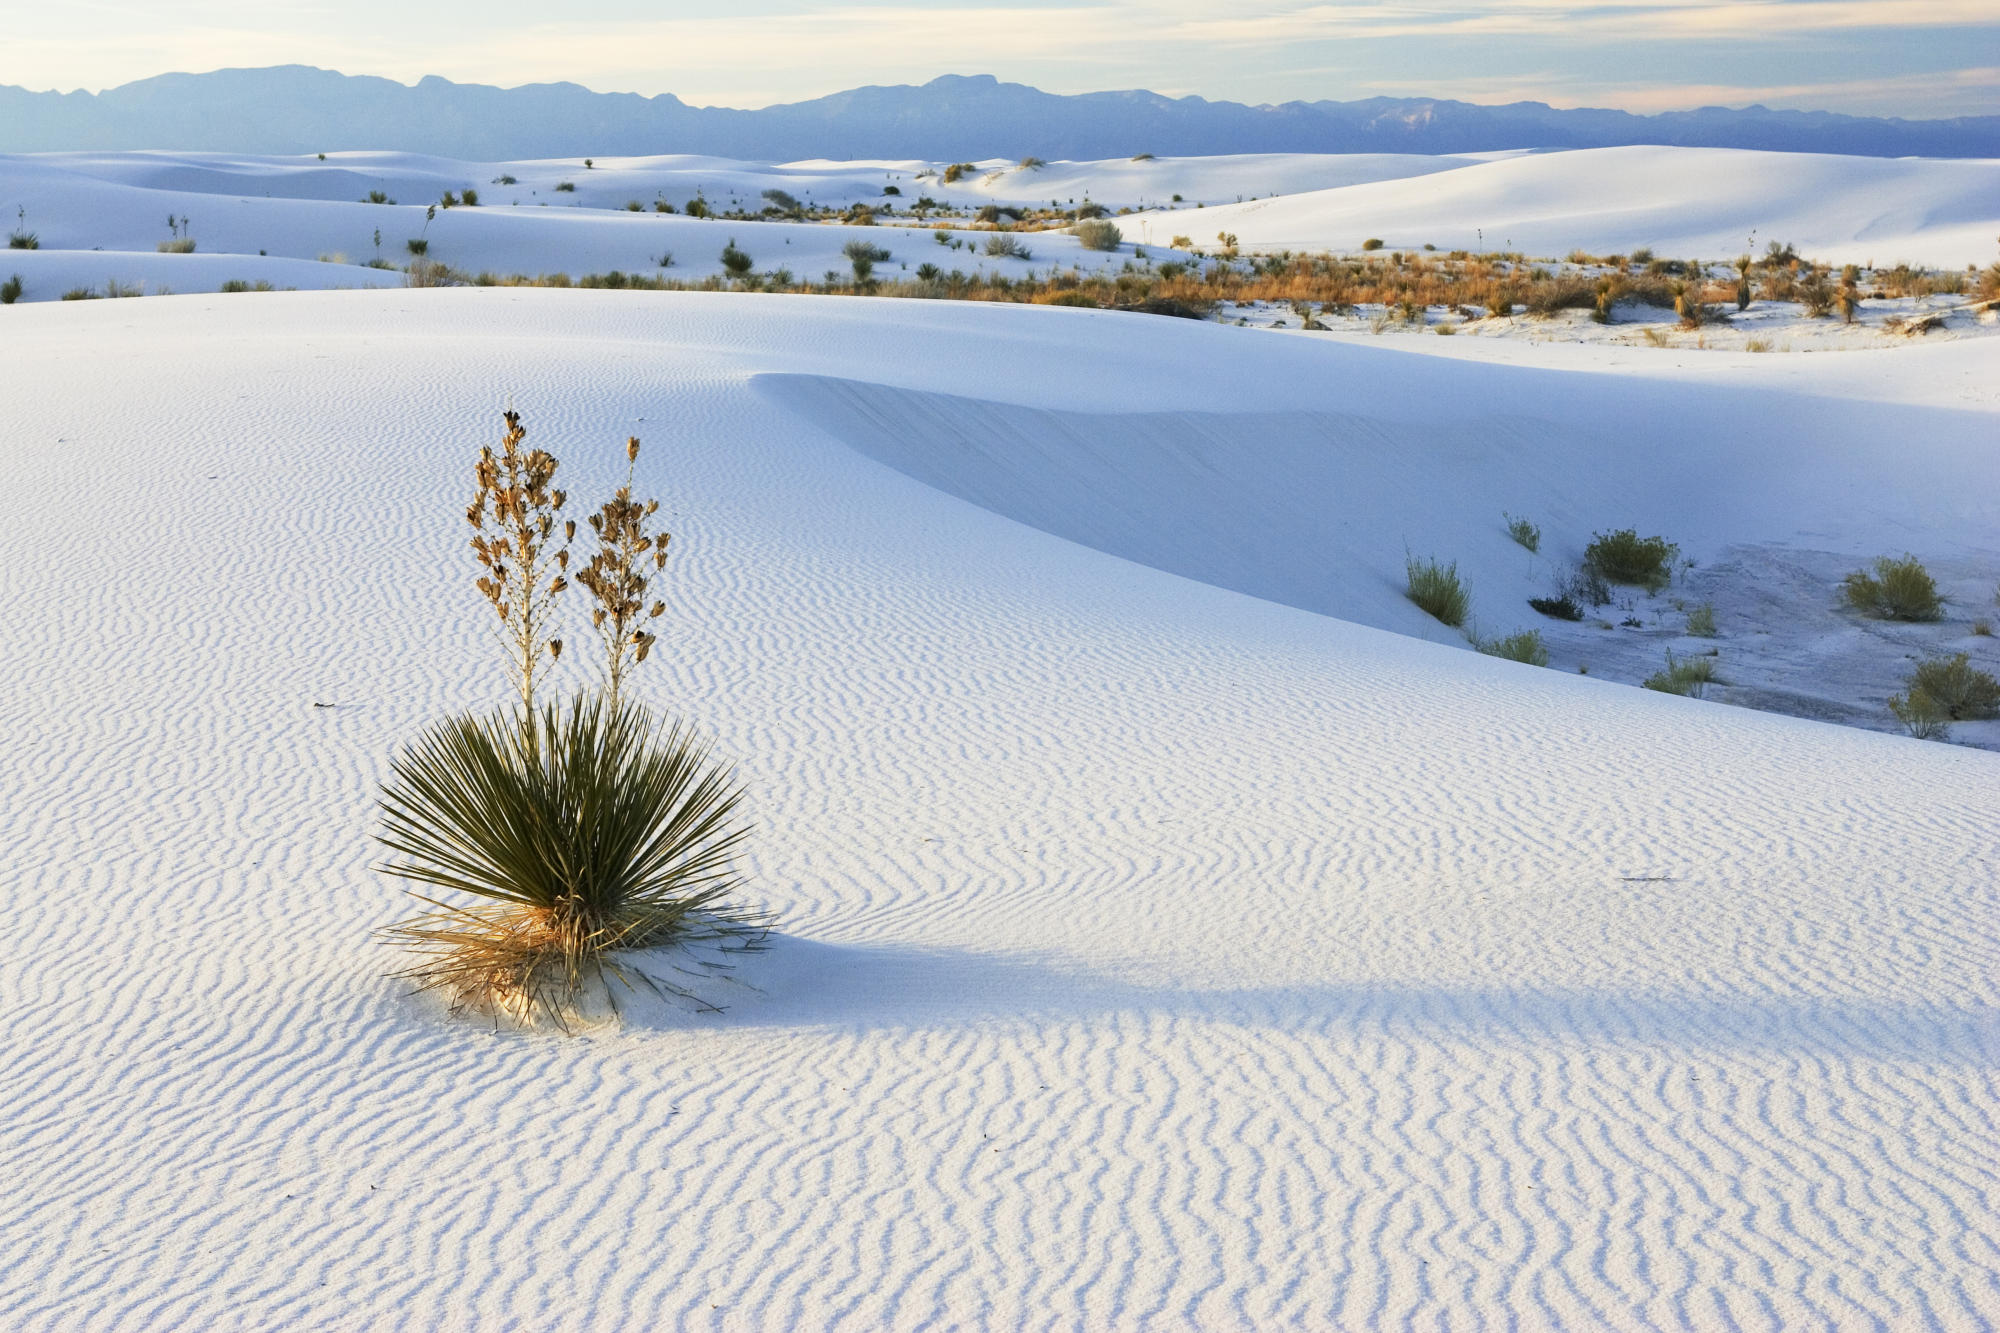 Soaptree, Yucca In Dunes, Yucca Elata, Gypsum Dune Field, White Sands National Monument, New Mexico, Usa